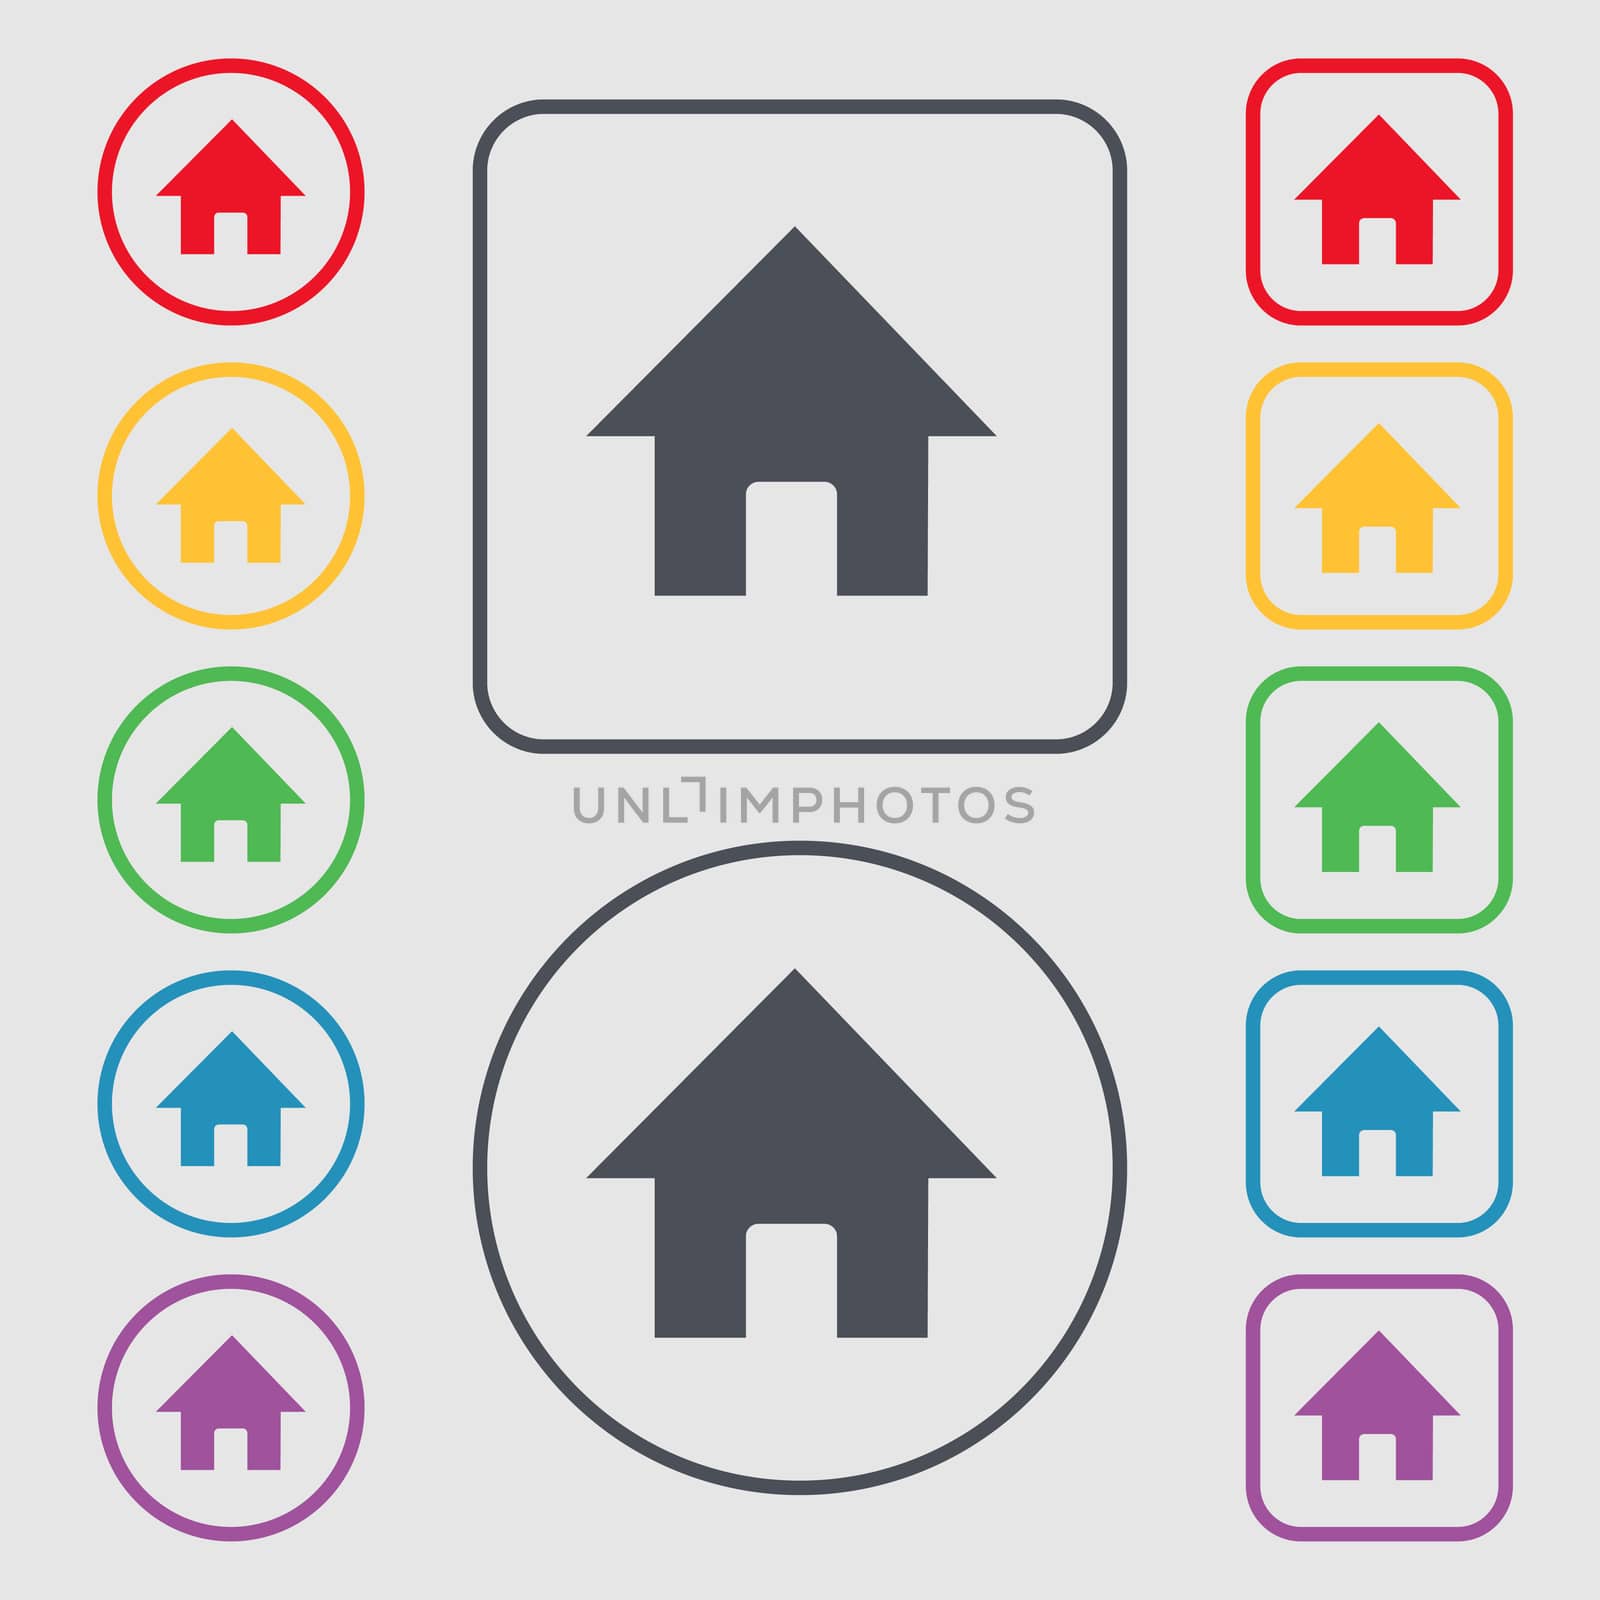 Home, Main page icon sign. symbol on the Round and square buttons with frame. illustration